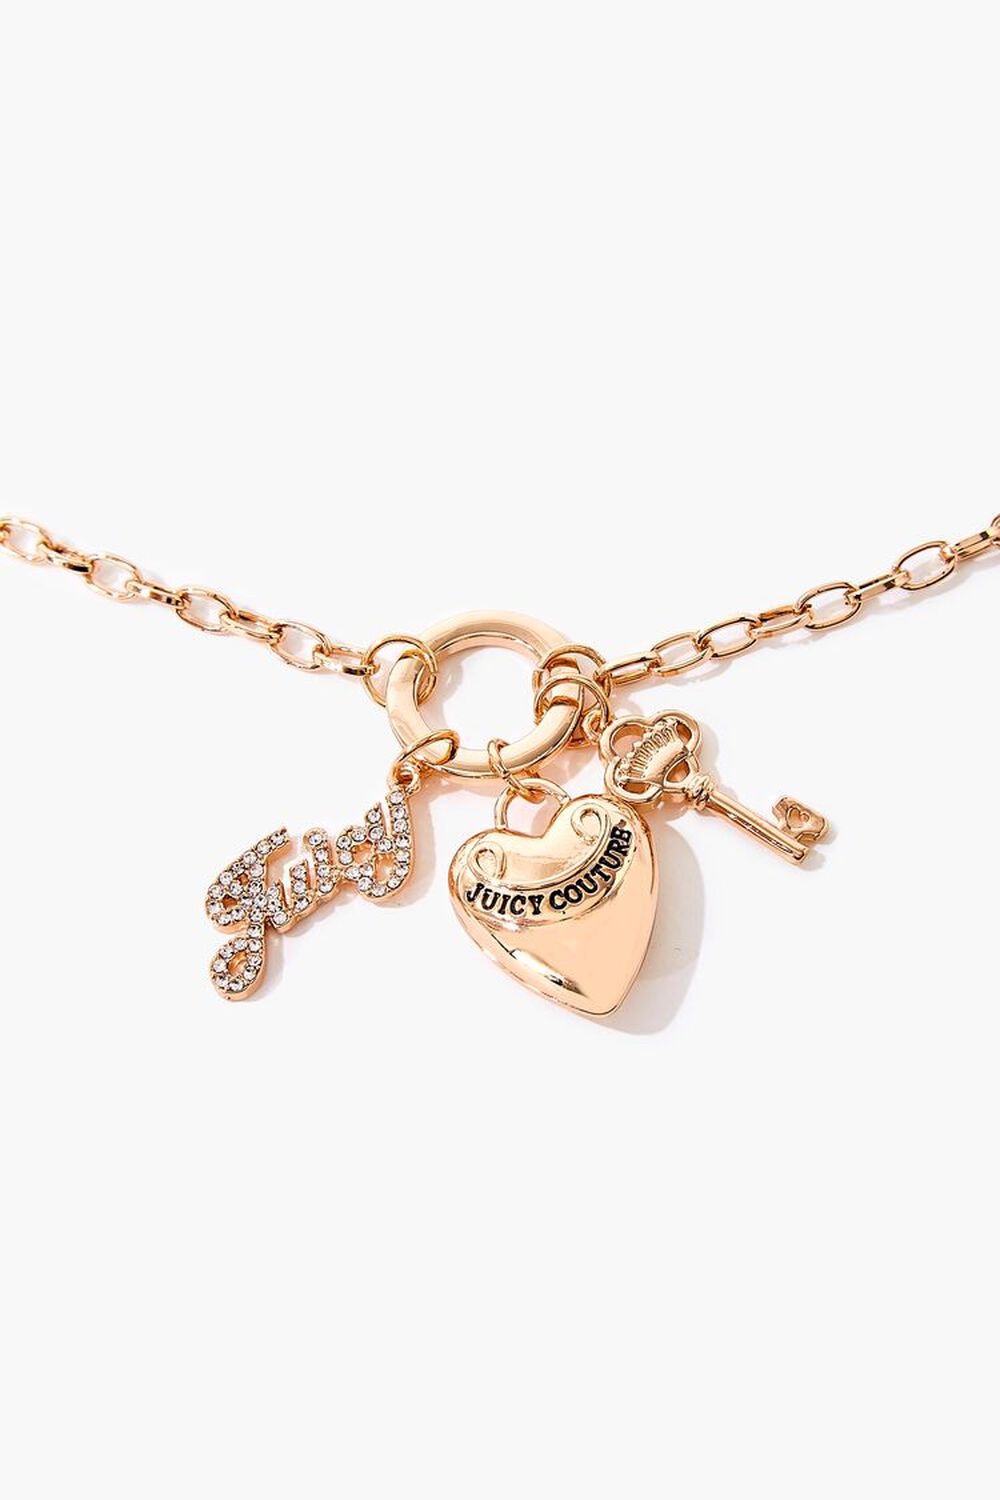 Juicy Couture charm necklace  Juicy couture charm necklace, Juicy